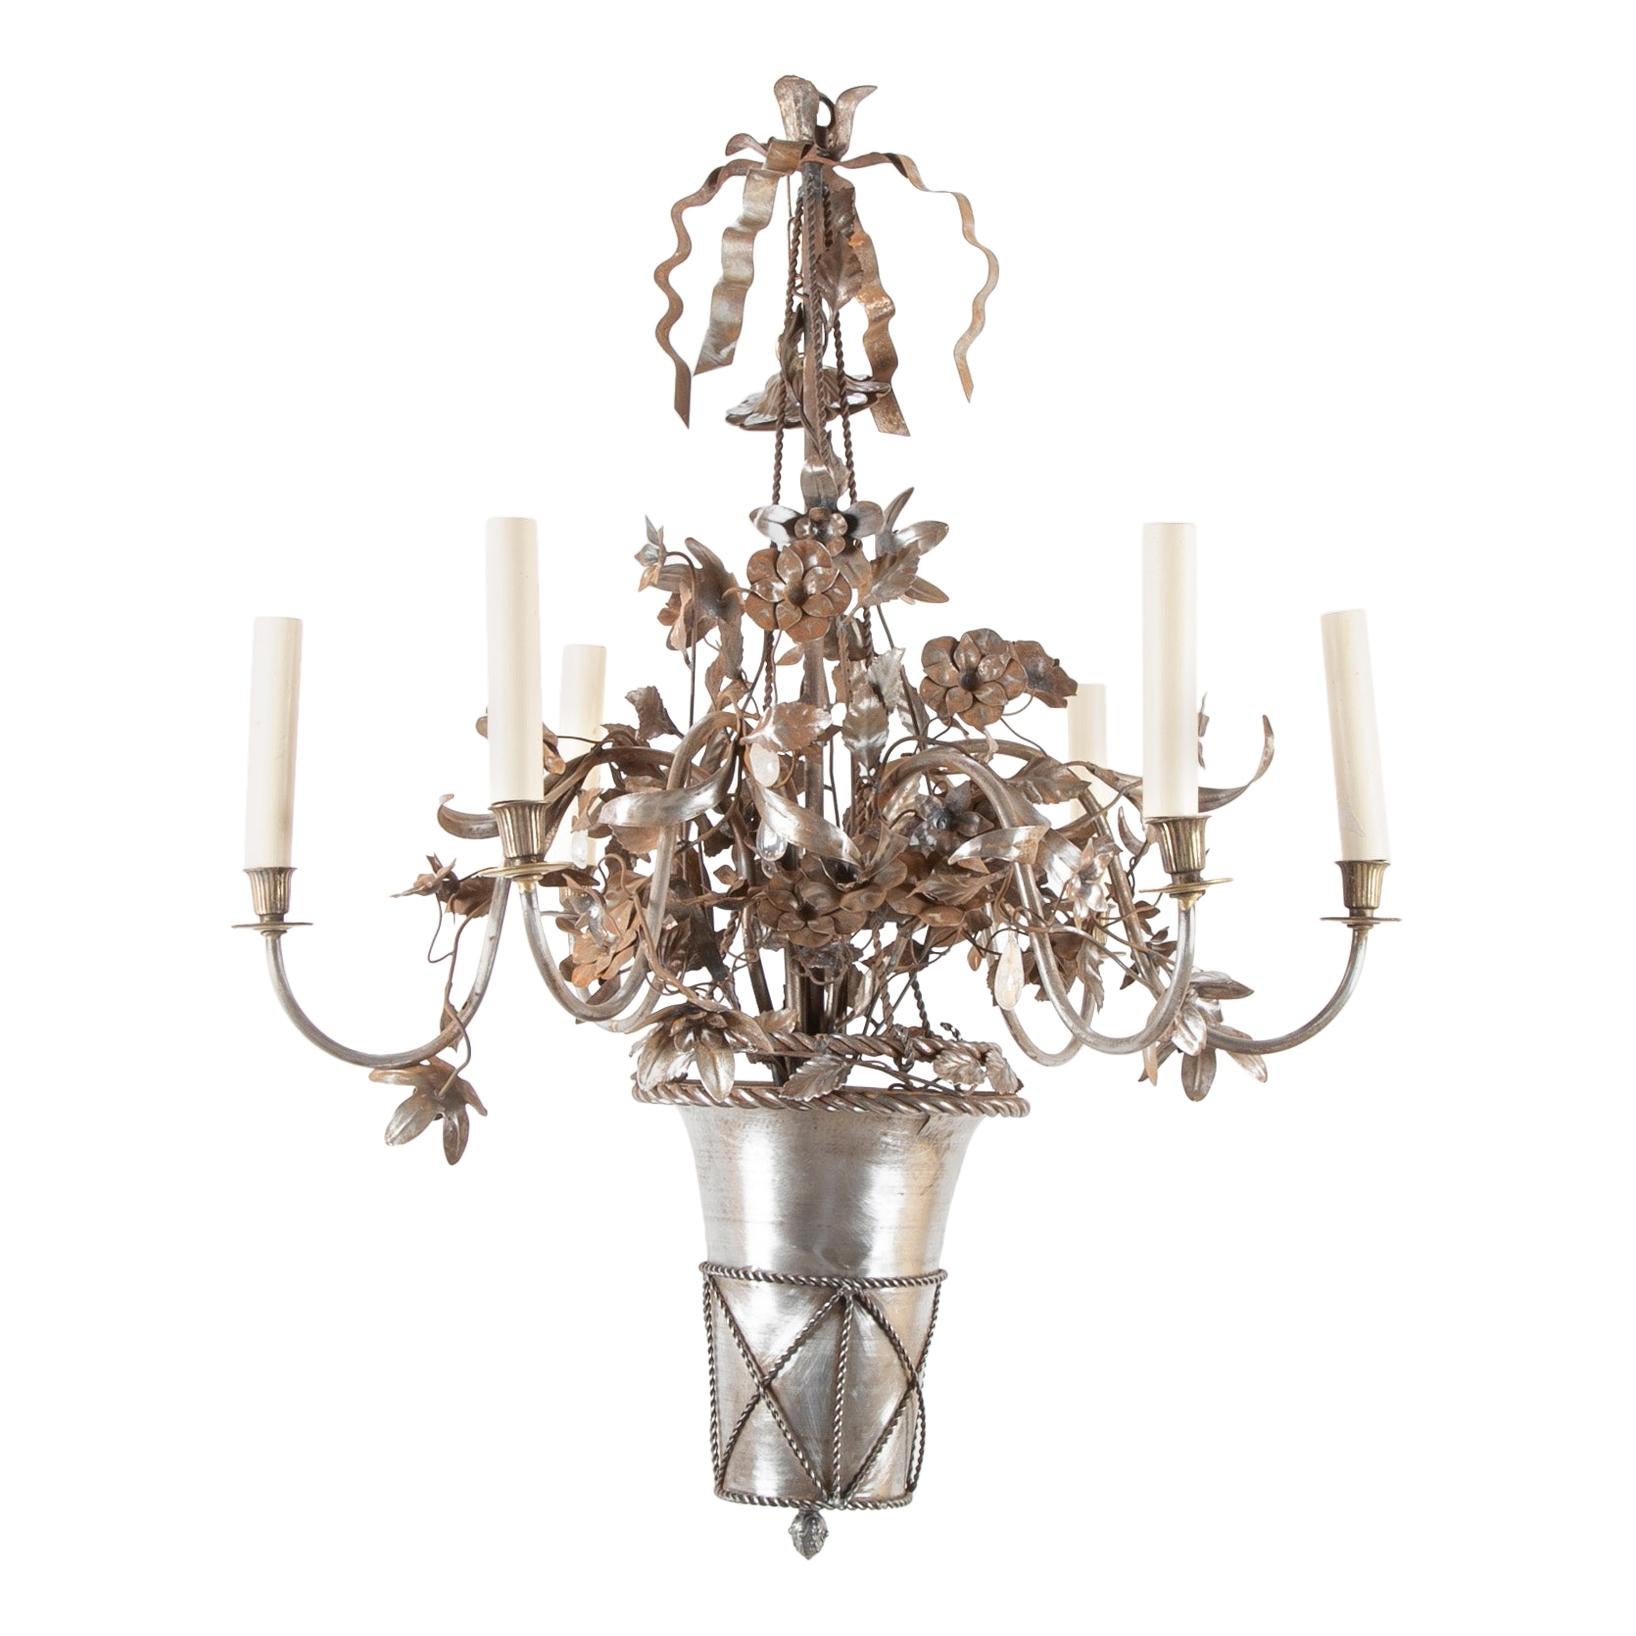 Vintage Steel Floral Chandelier with Basket, Bow Knots and Ribbons For Sale